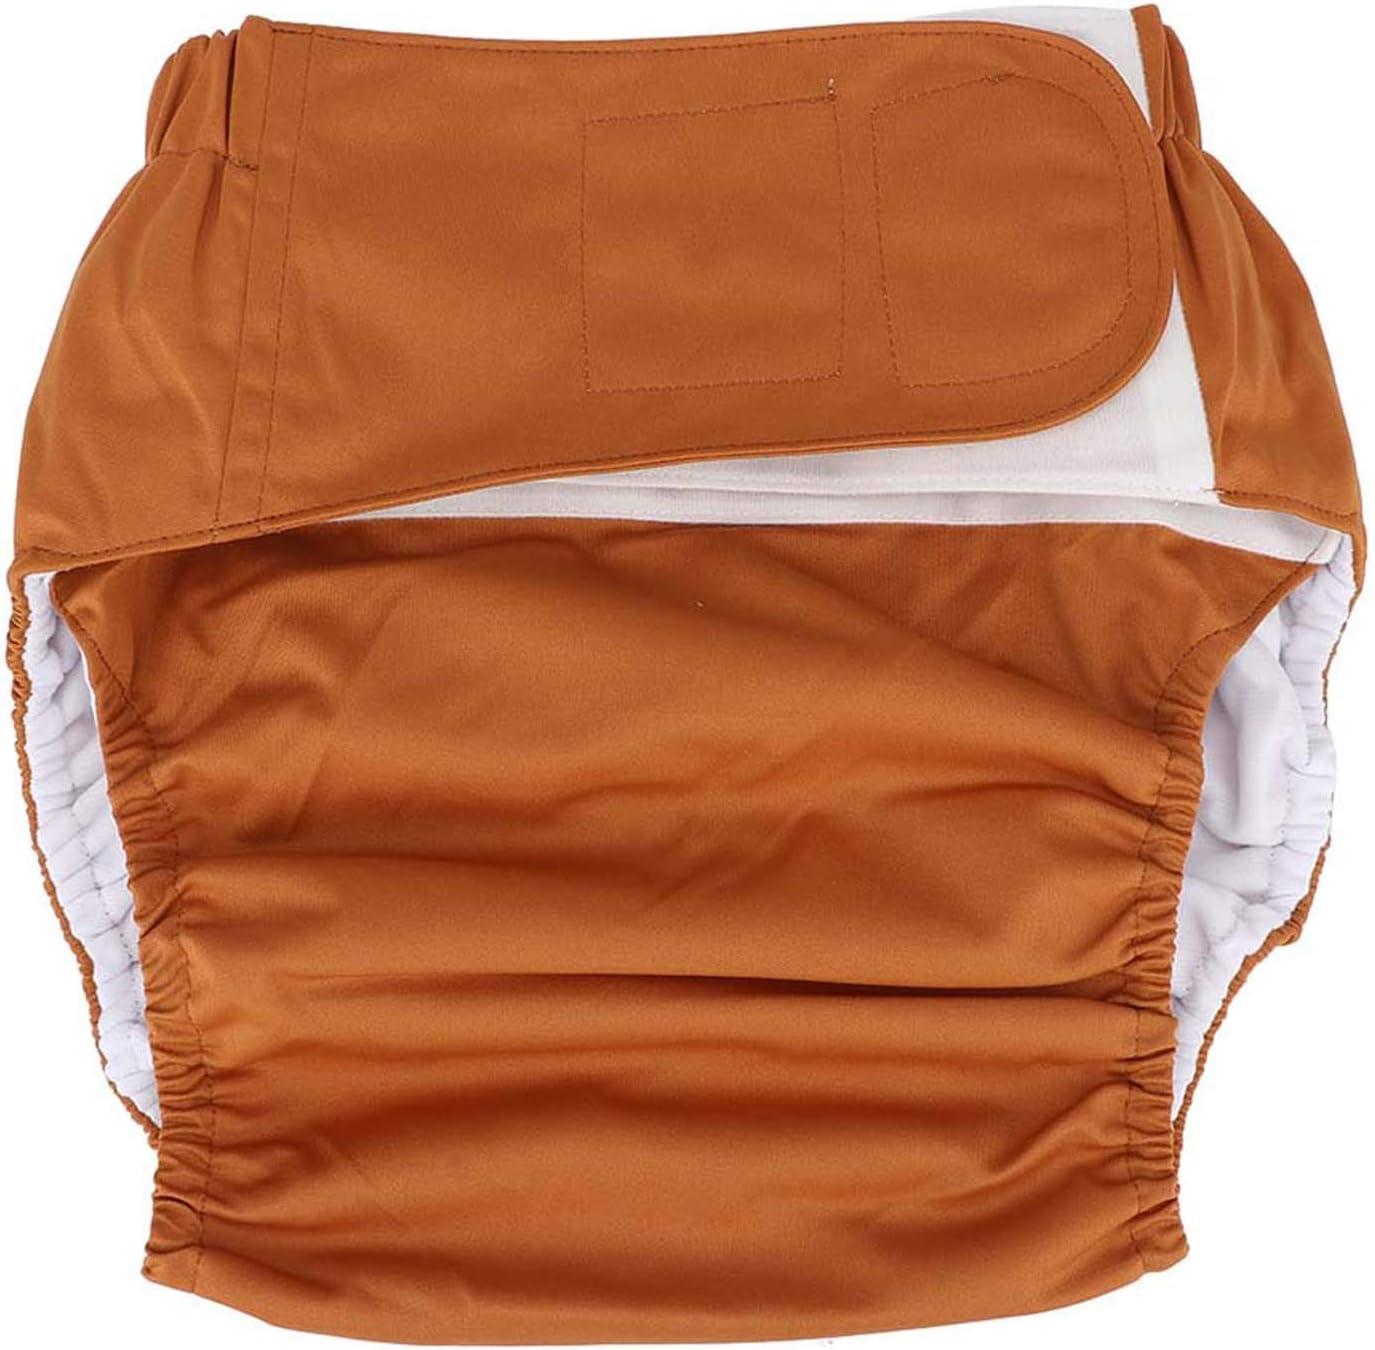 Adult Cloth Diapers Adult Swim Diapers Waterproof Washable